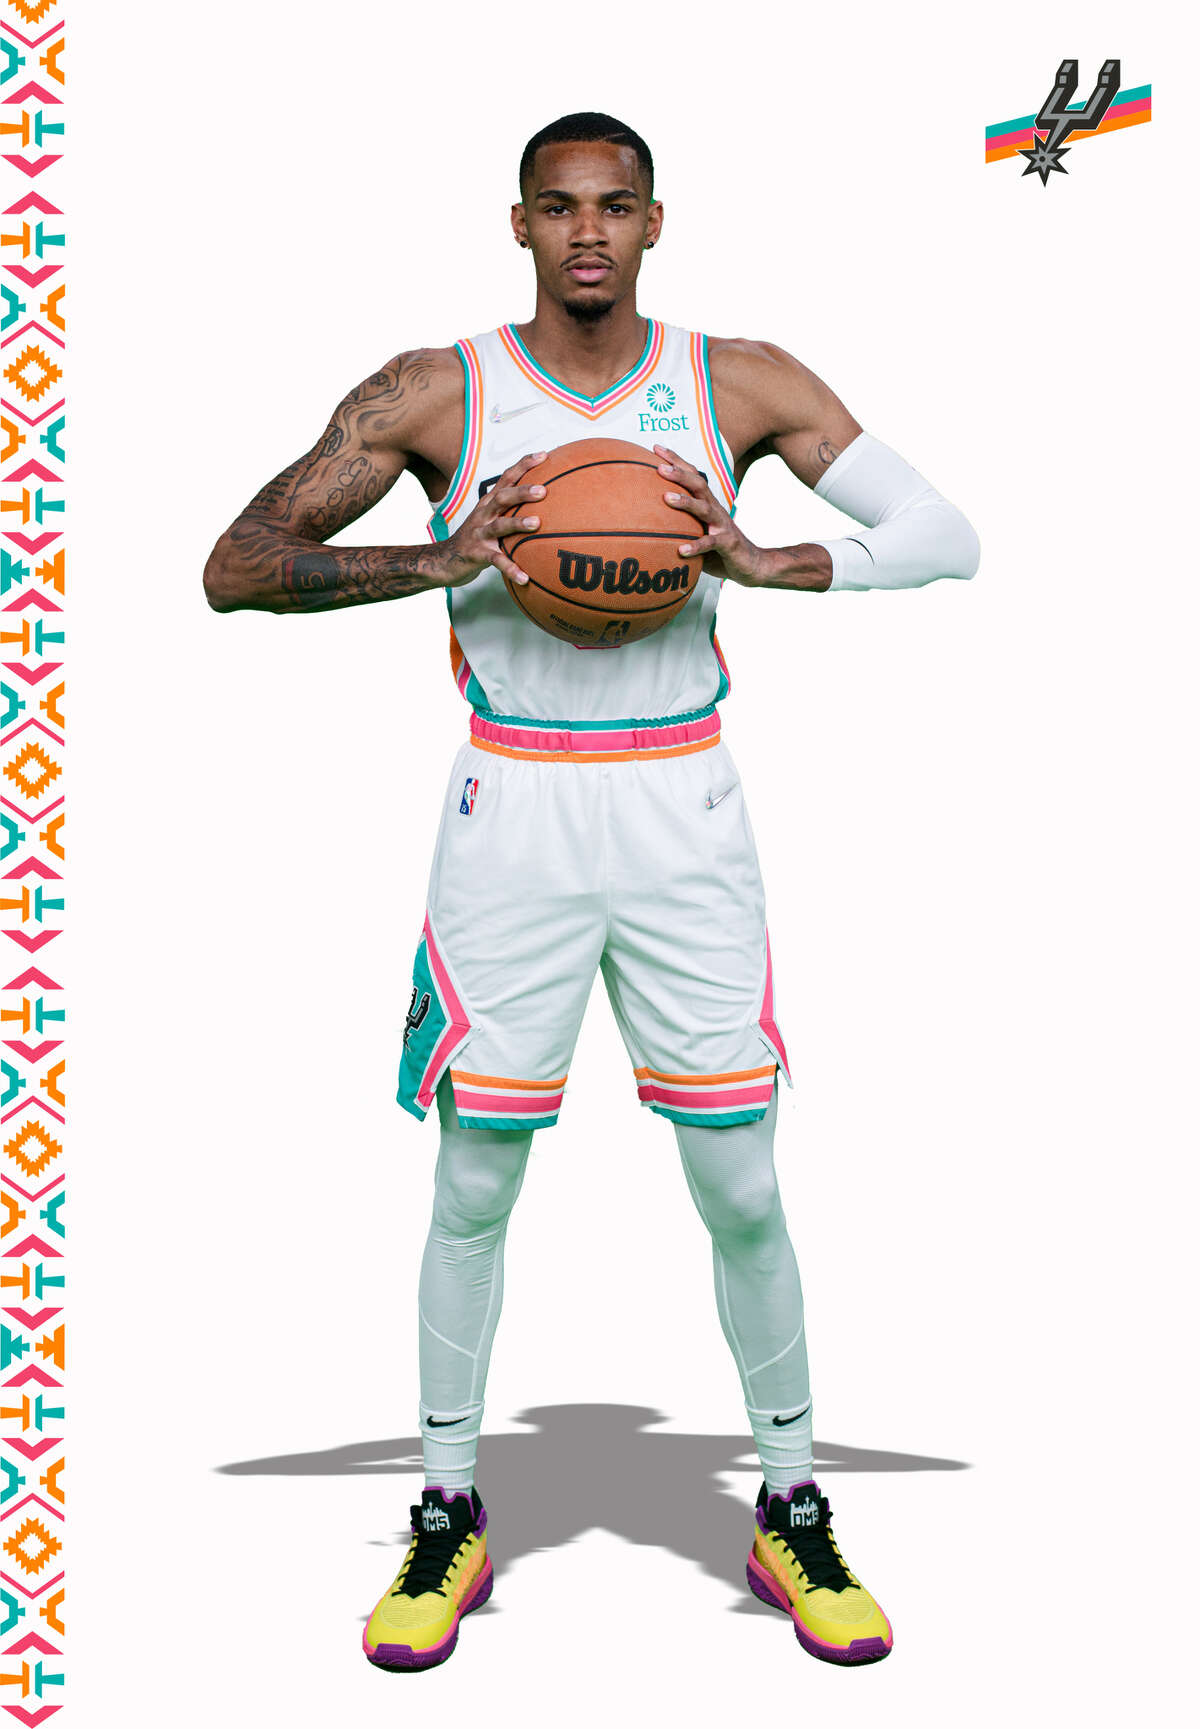 San Antonio Spurs Unveil New Uniforms Inspired By Their 90s Warmups